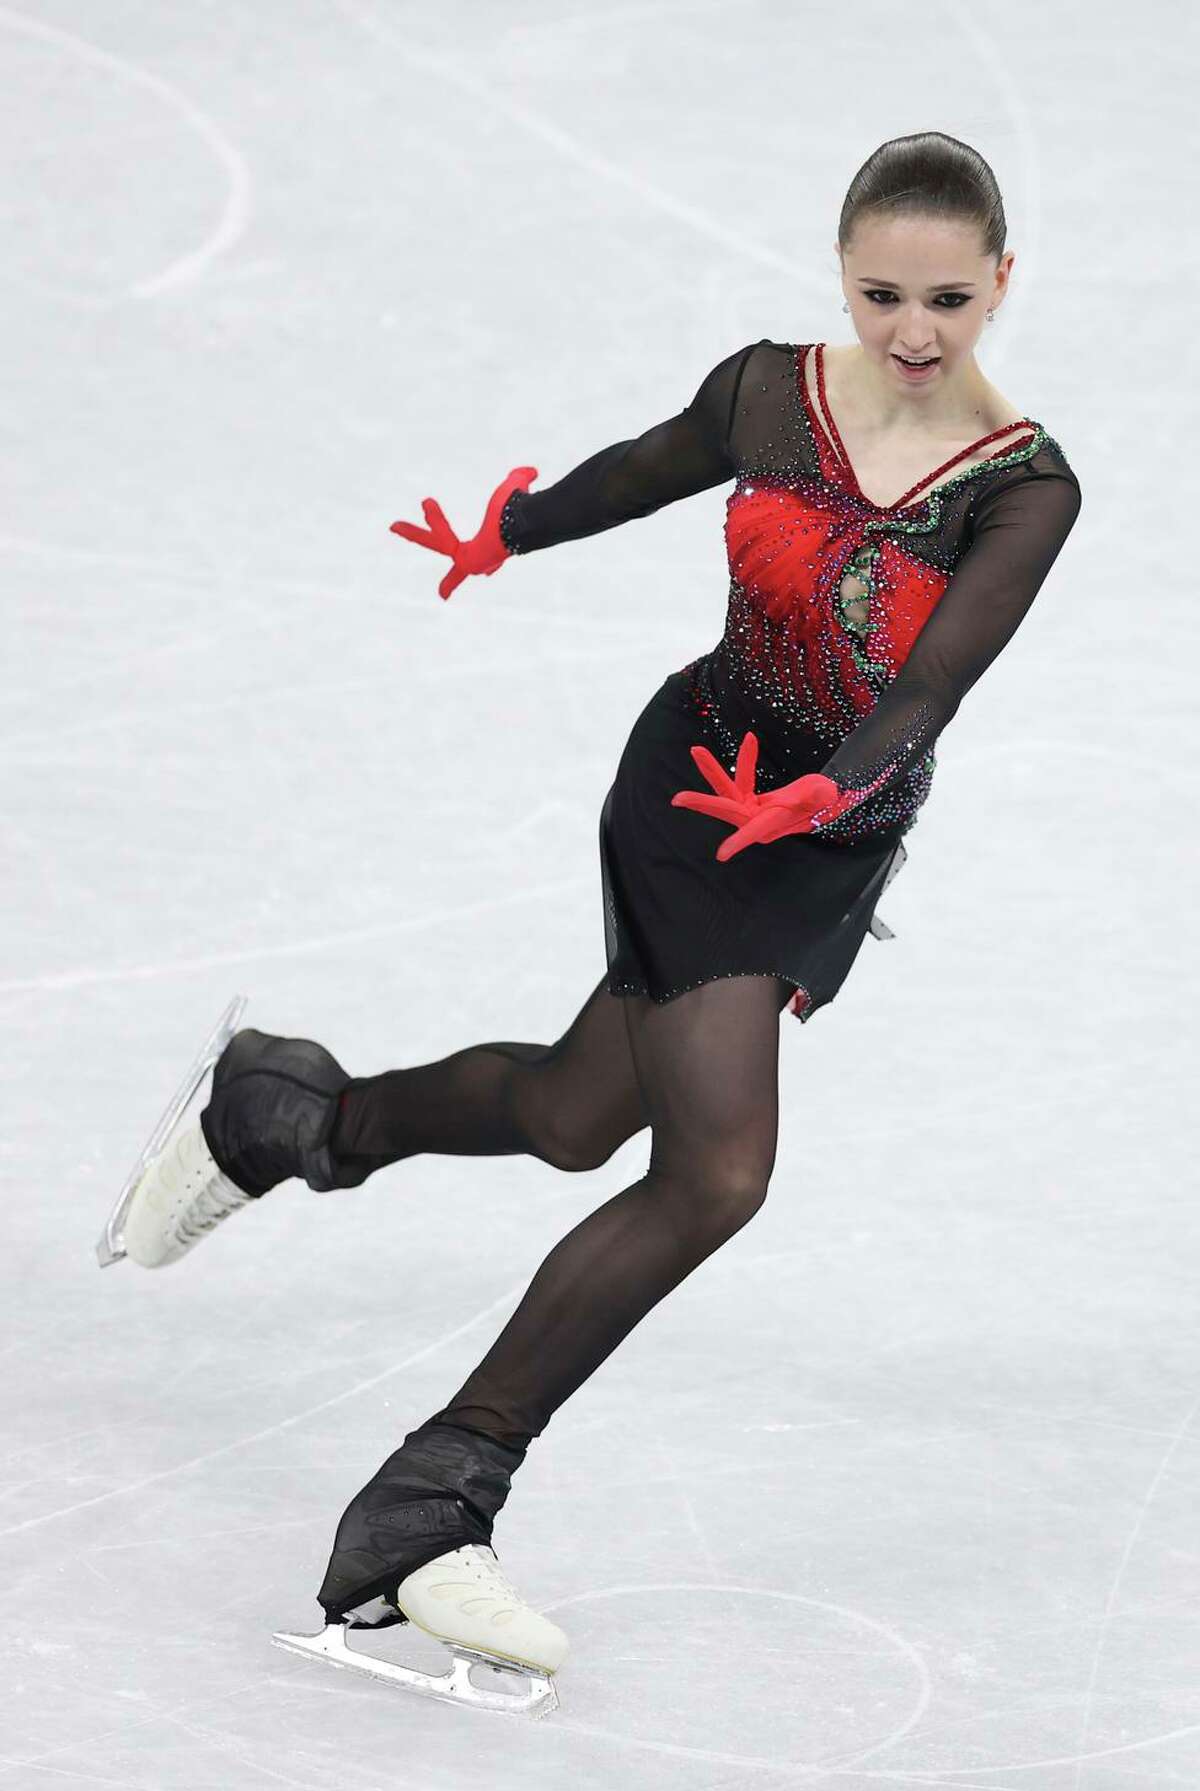 Russian skater Kamila Valieva’s positive test for a banned substance 6 weeks ago has delayed the awarding of team medals.